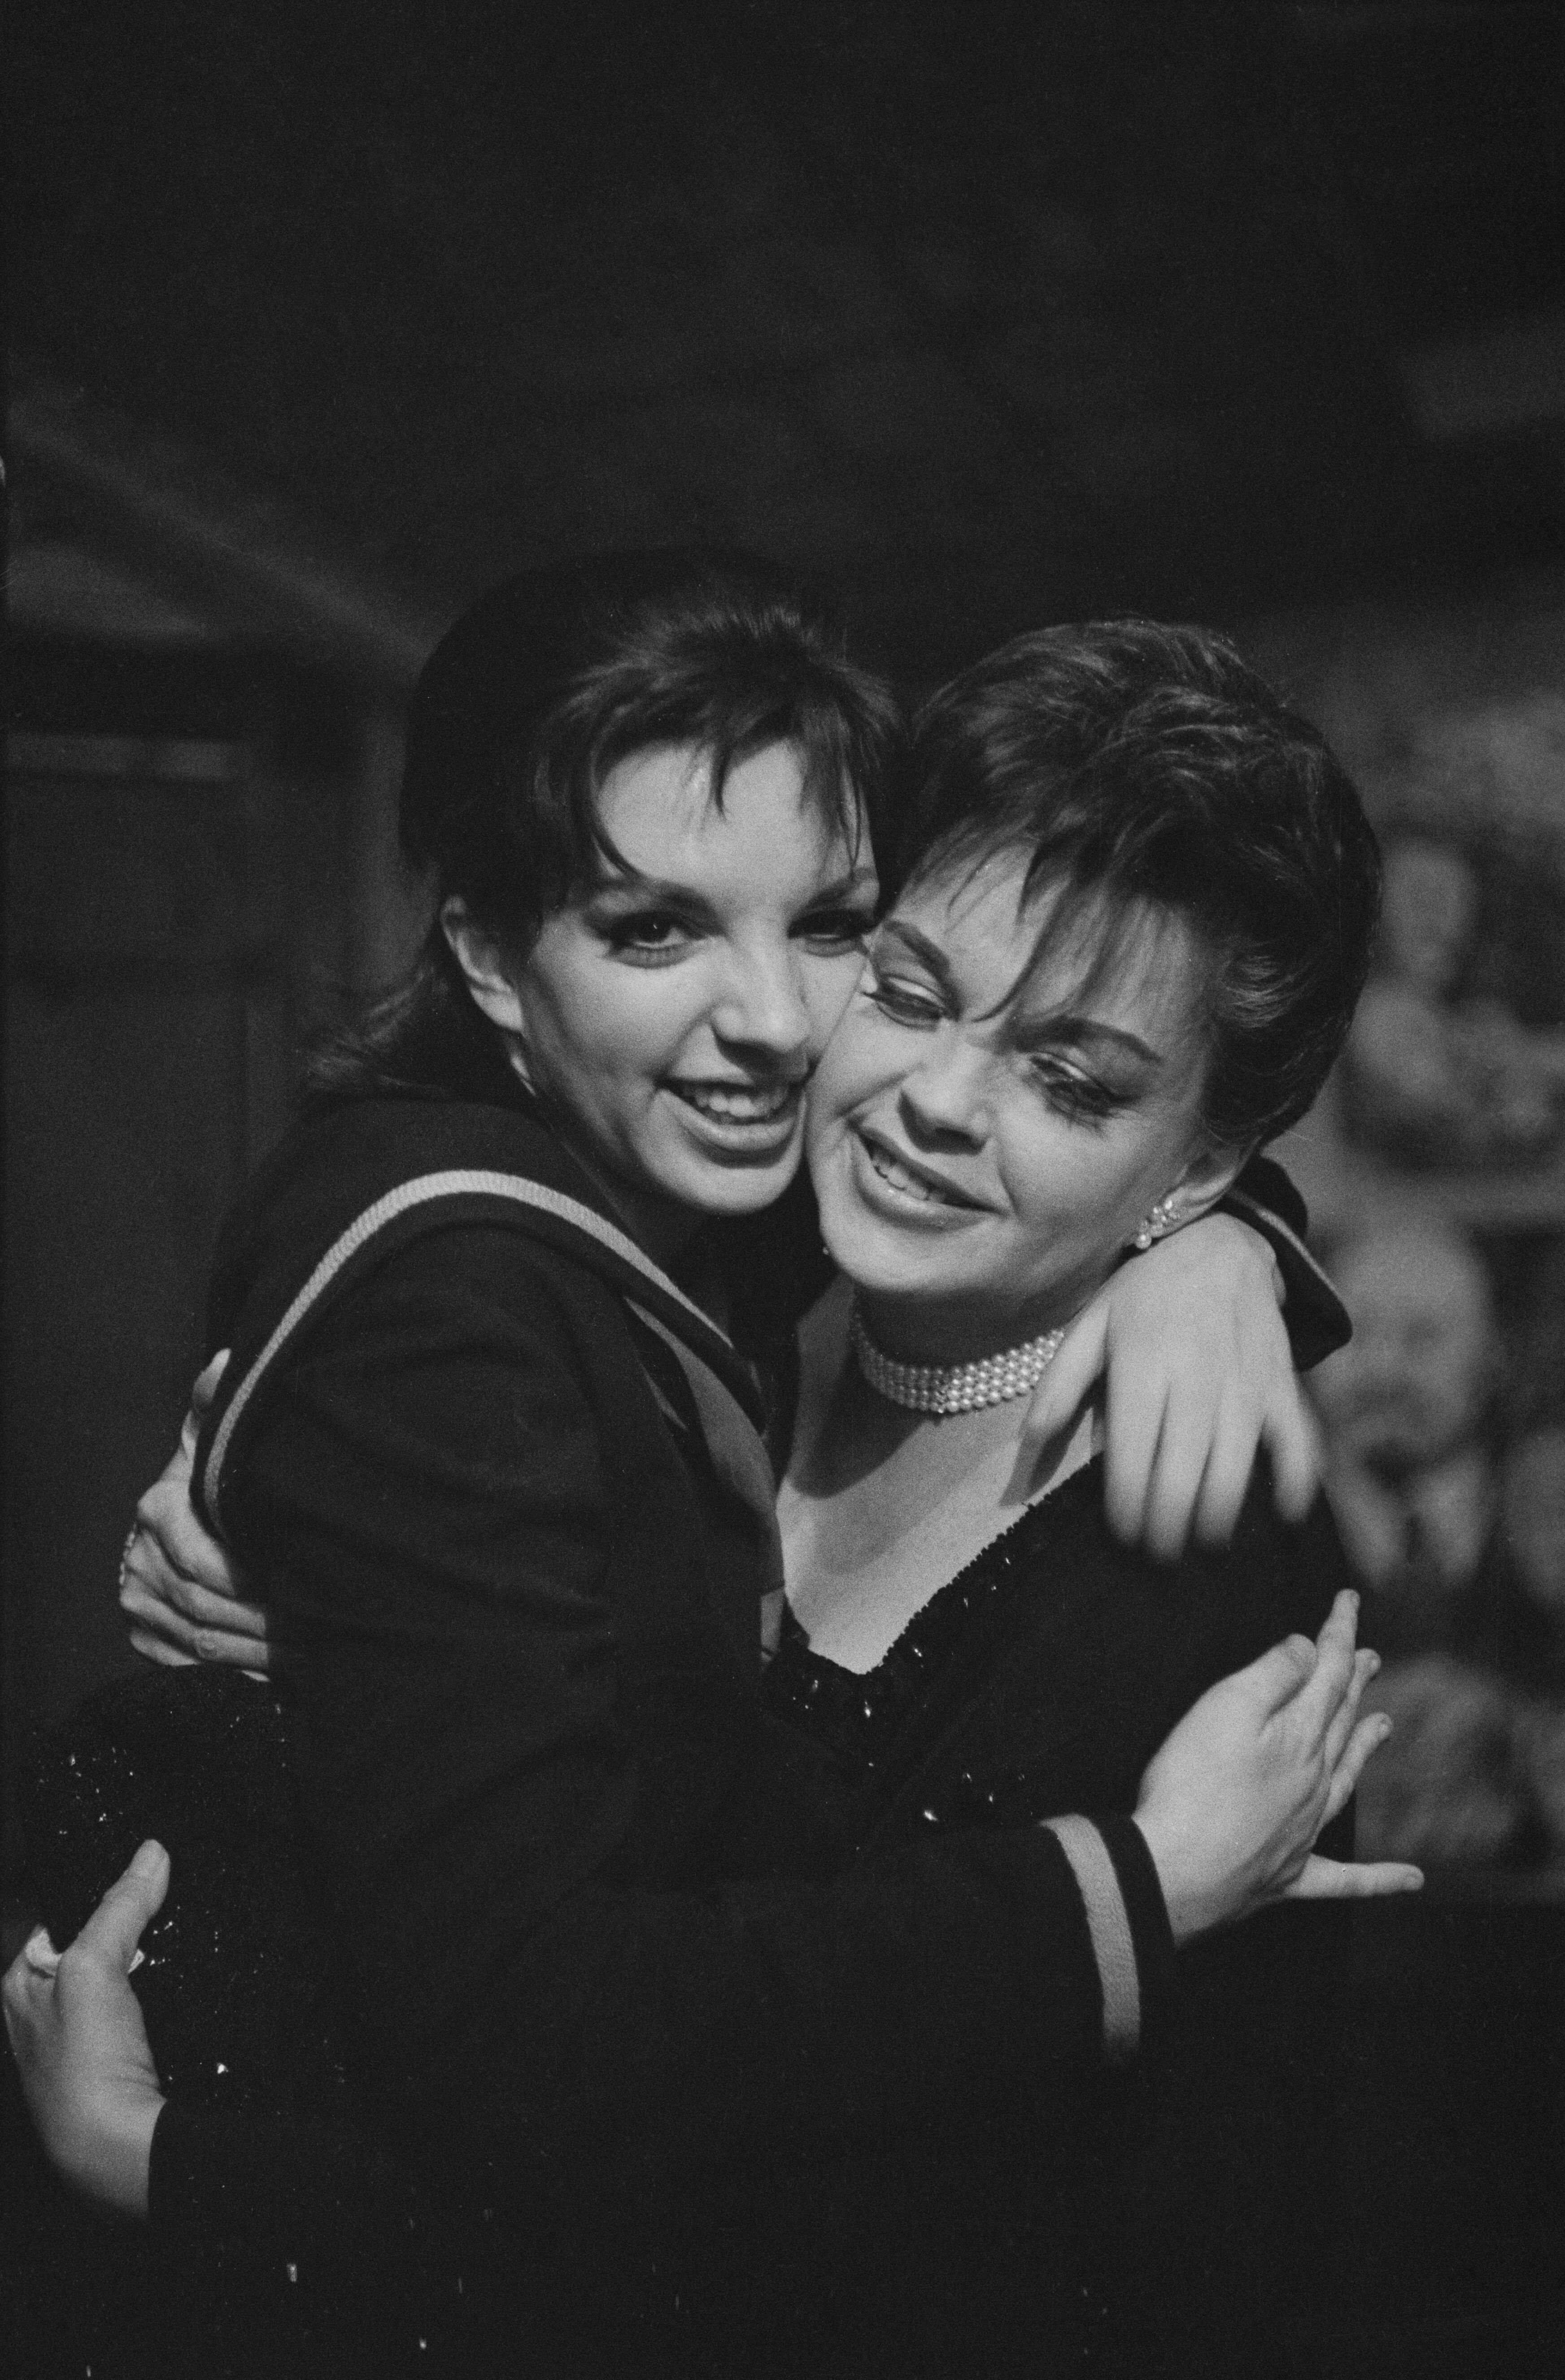 Liza Minnelli with Judy Garland backstage after she opened in 'Flora the Red Menace' at the Alvin Theatre, New York on May 11, 1965 | Photo: Regan/Daily Express/Hulton Archive/Getty Images